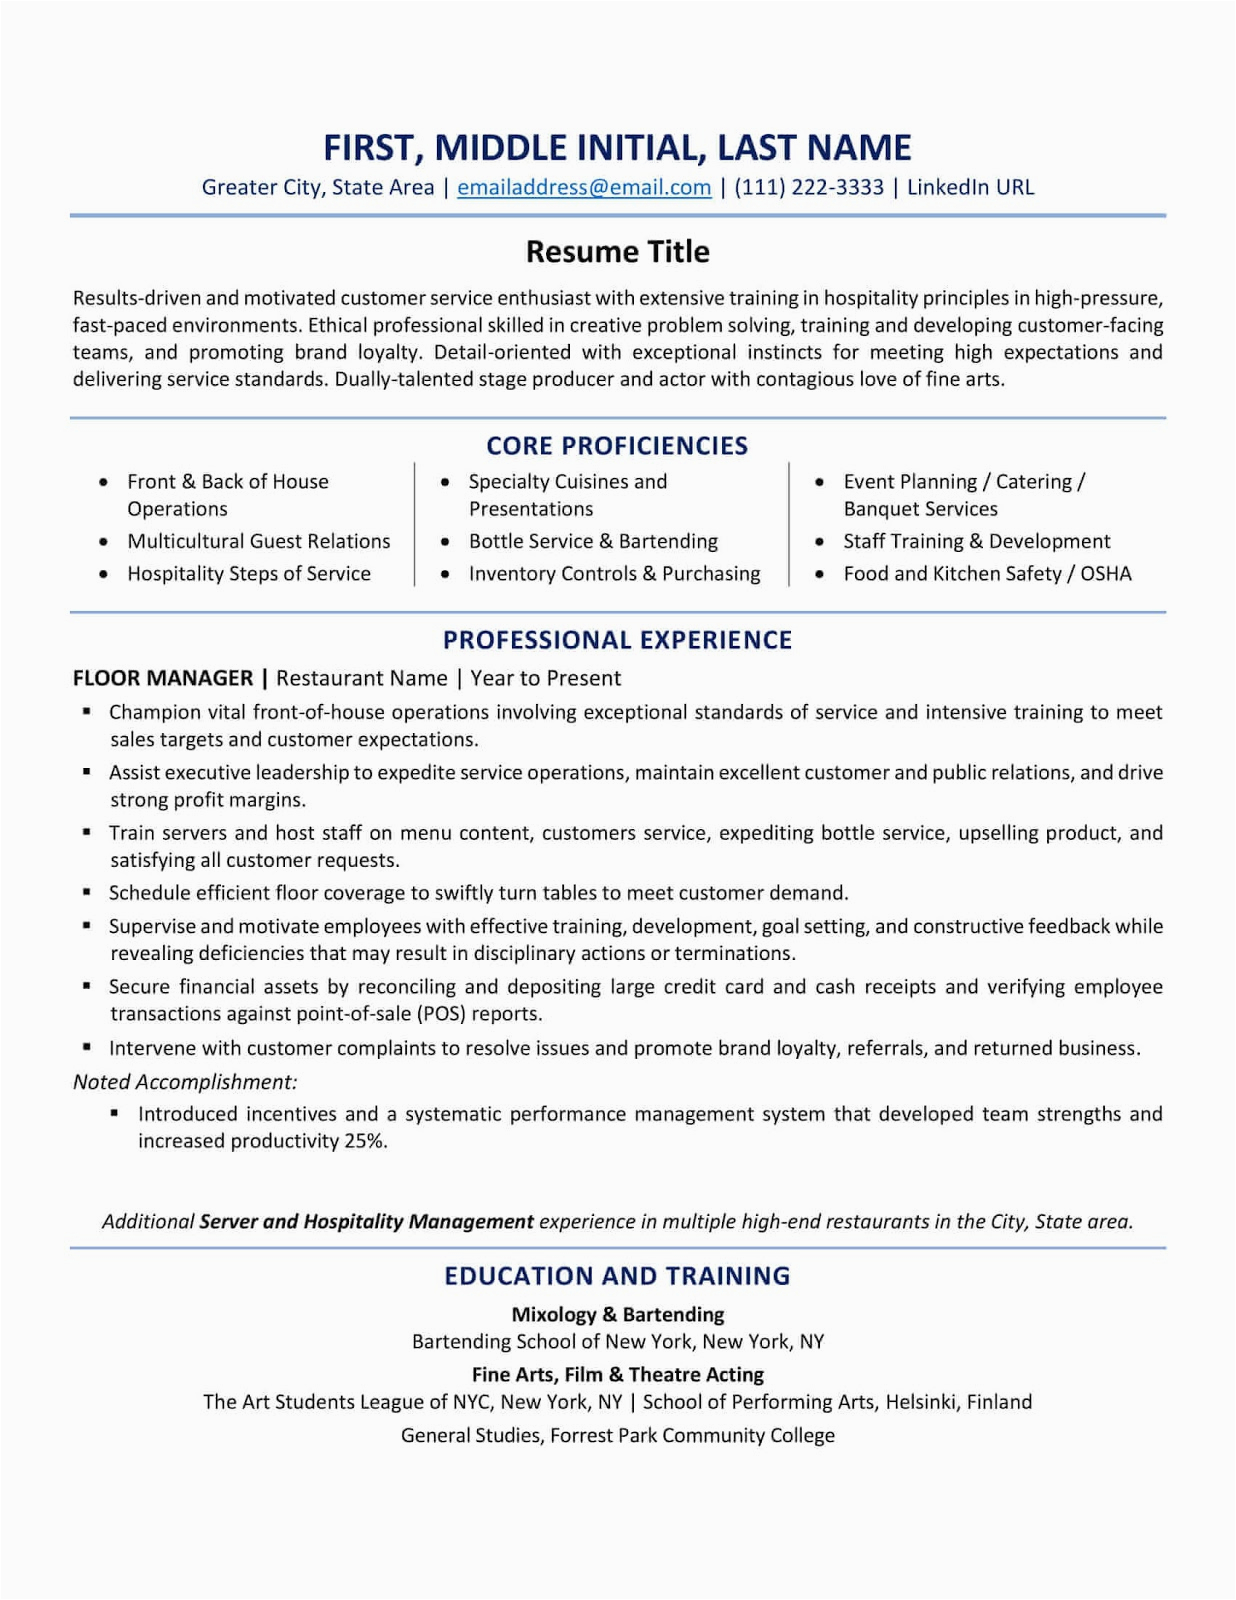 Sample Resume for Job Application In Canada Canada Resume format Best Tips and Examples Updated